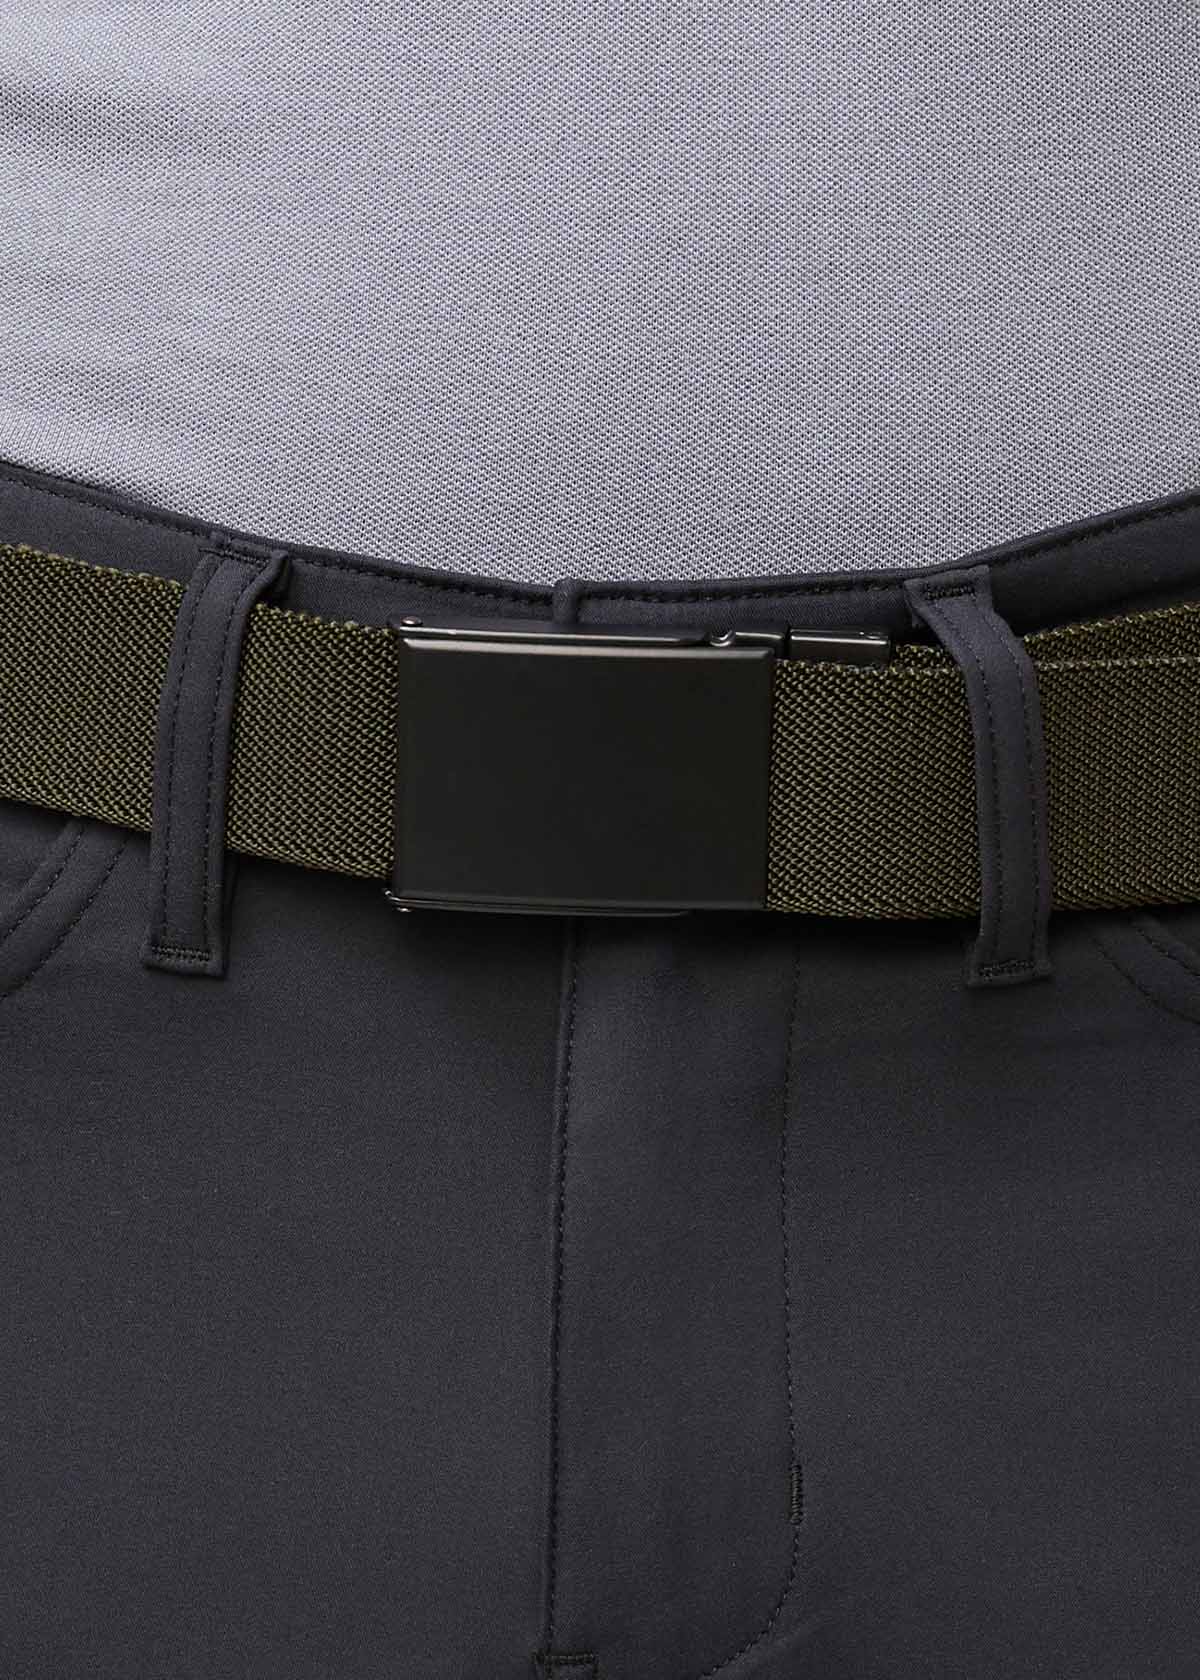 mens black and rmy green reversible stretch belt buckle close up